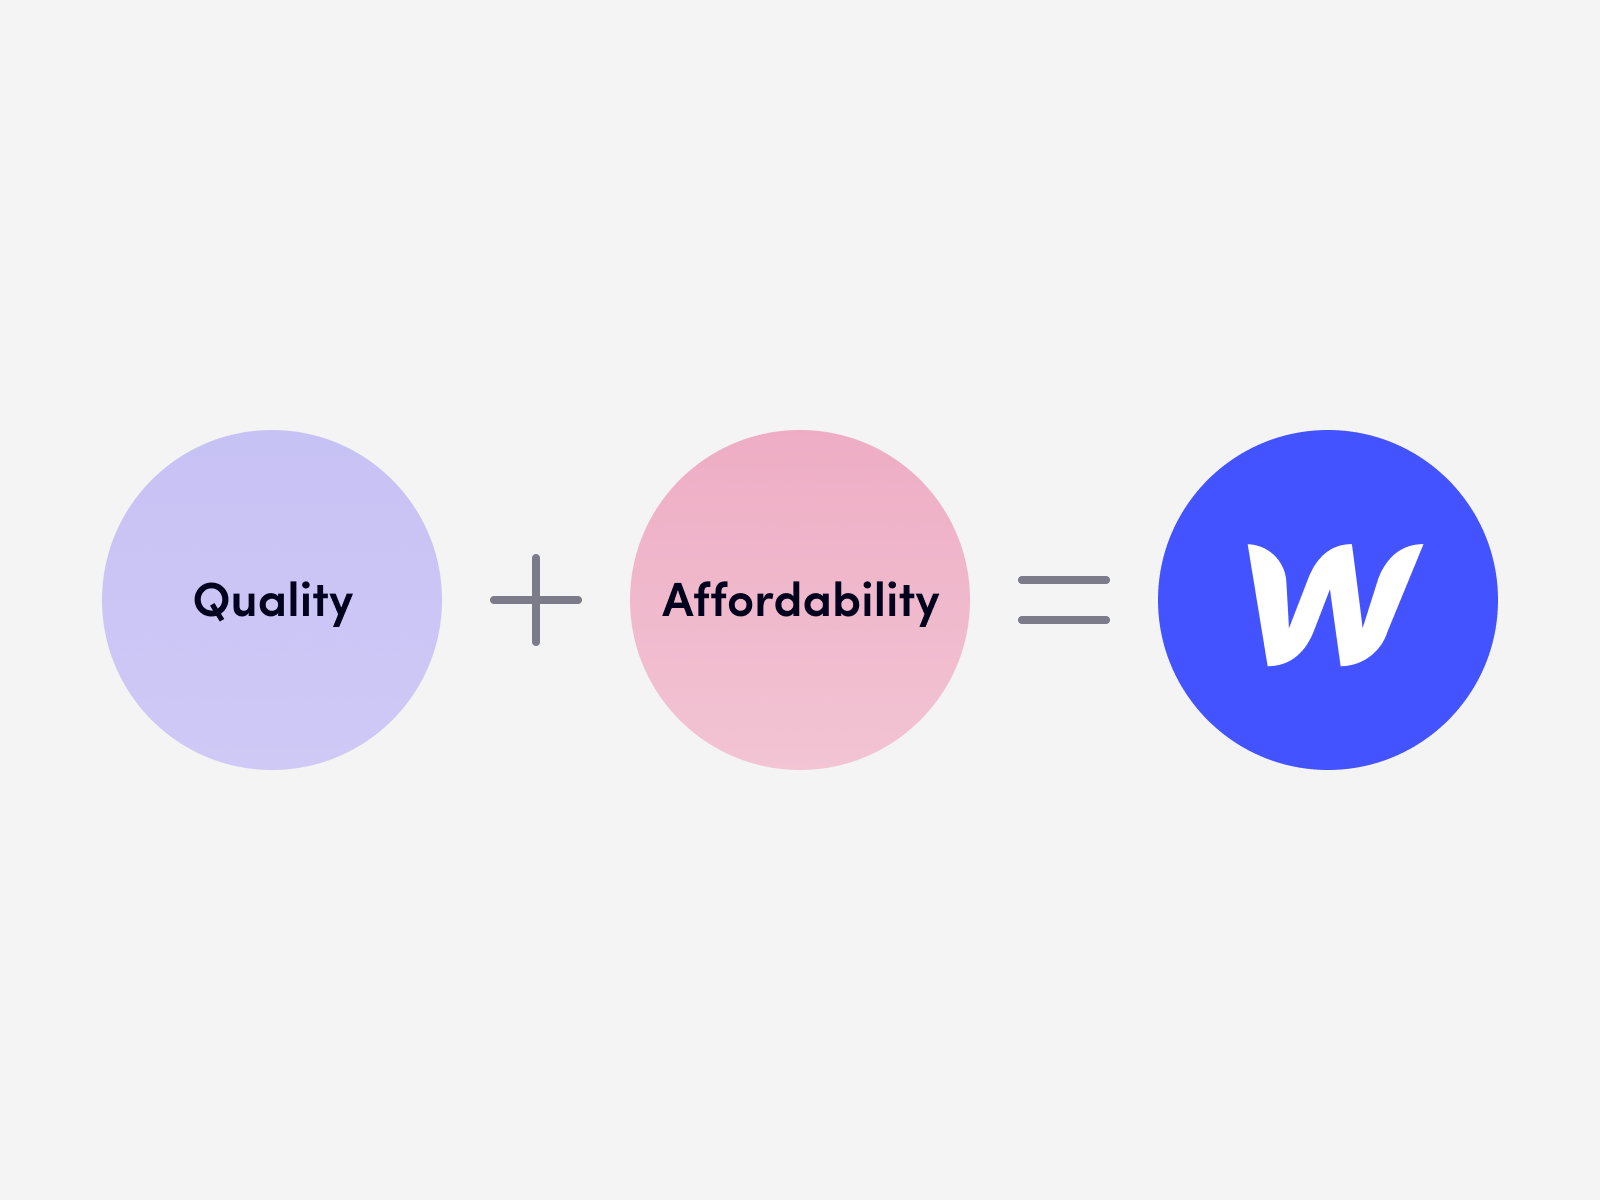 Webflow is an excellent option for clients who want both quality and affordability